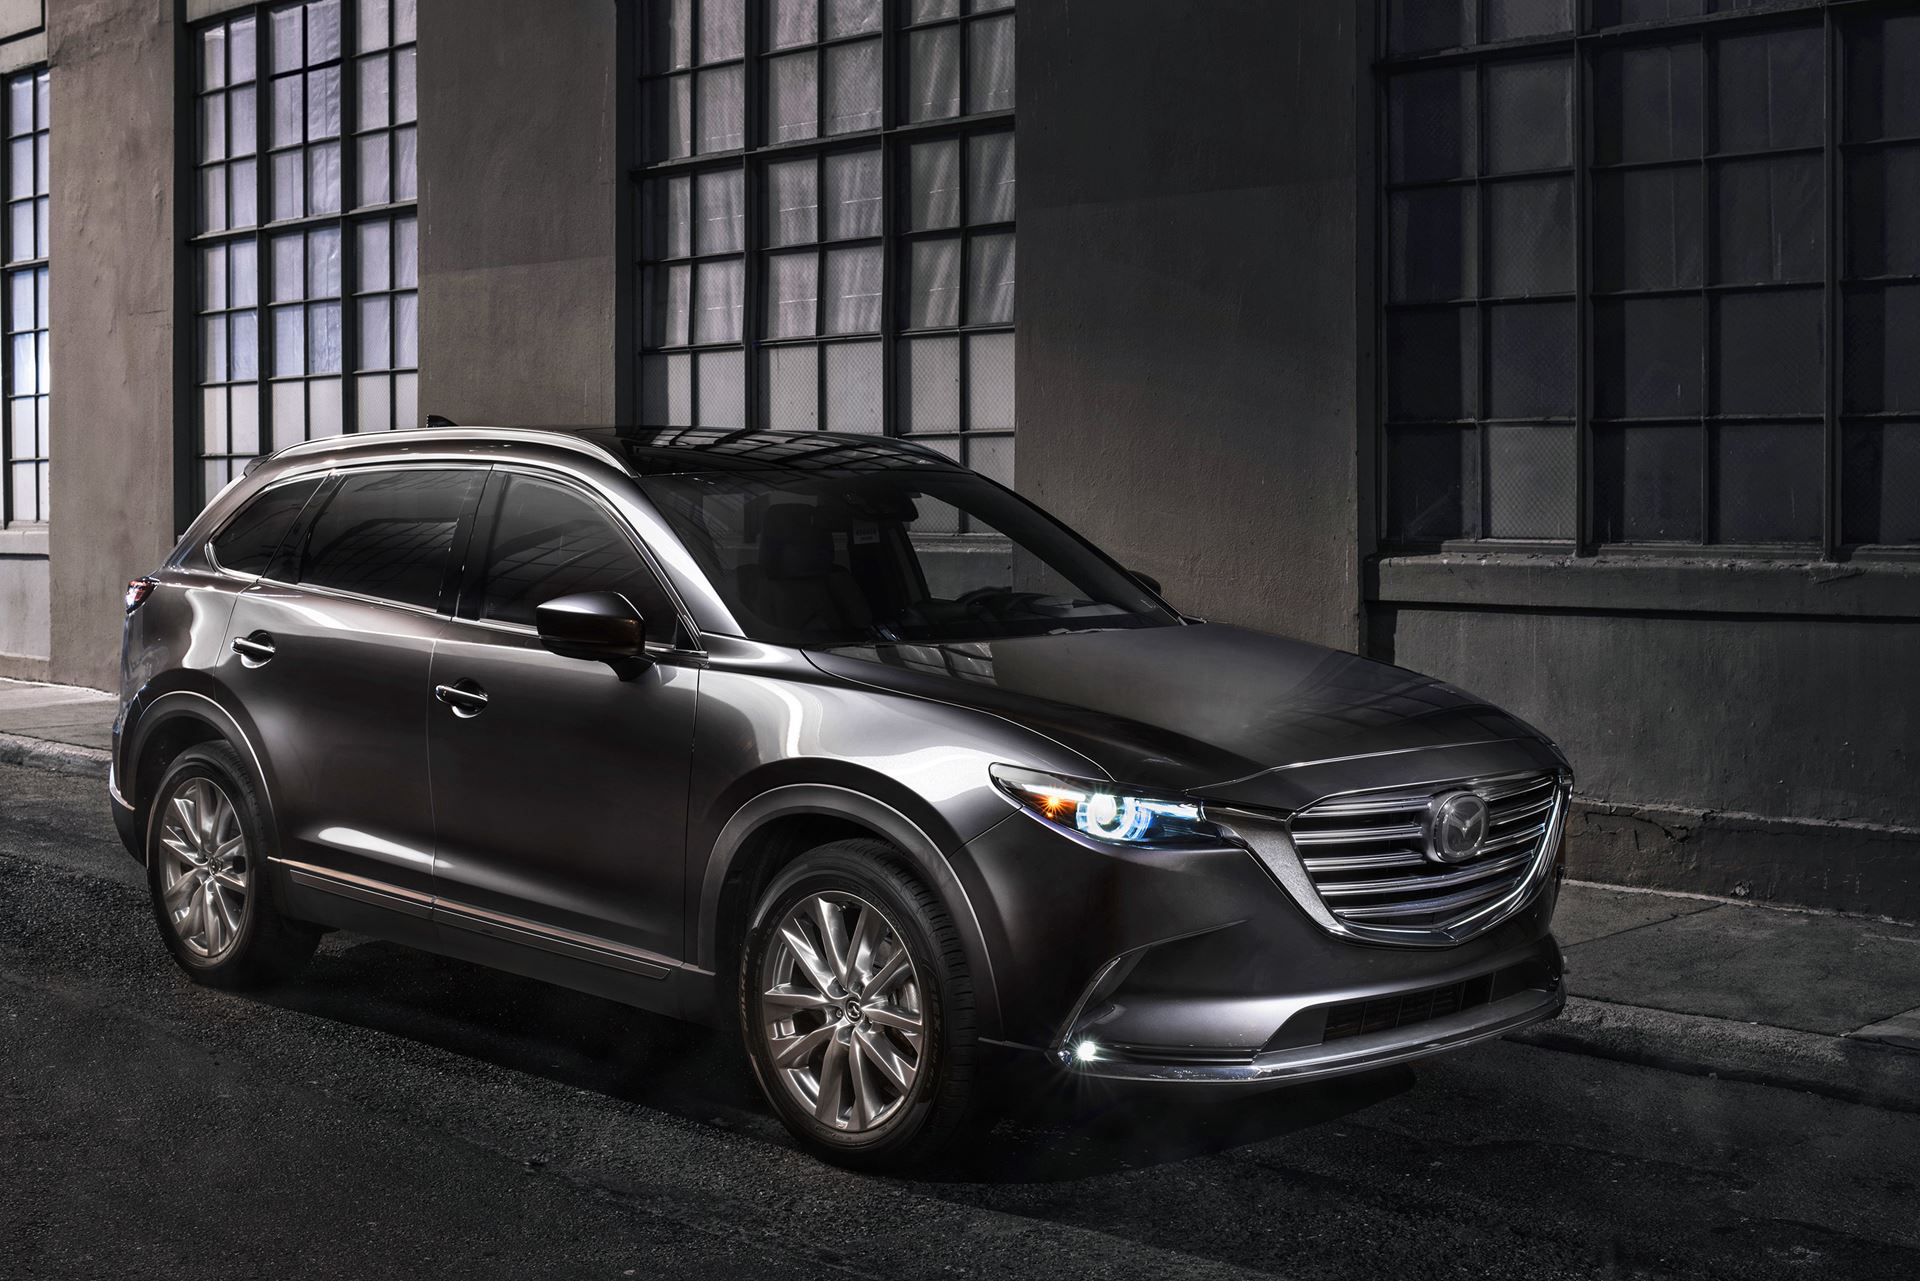 2018 Mazda CX-9 Flagship Three-Row Crossover SUV Receives Long List Of Upgrades